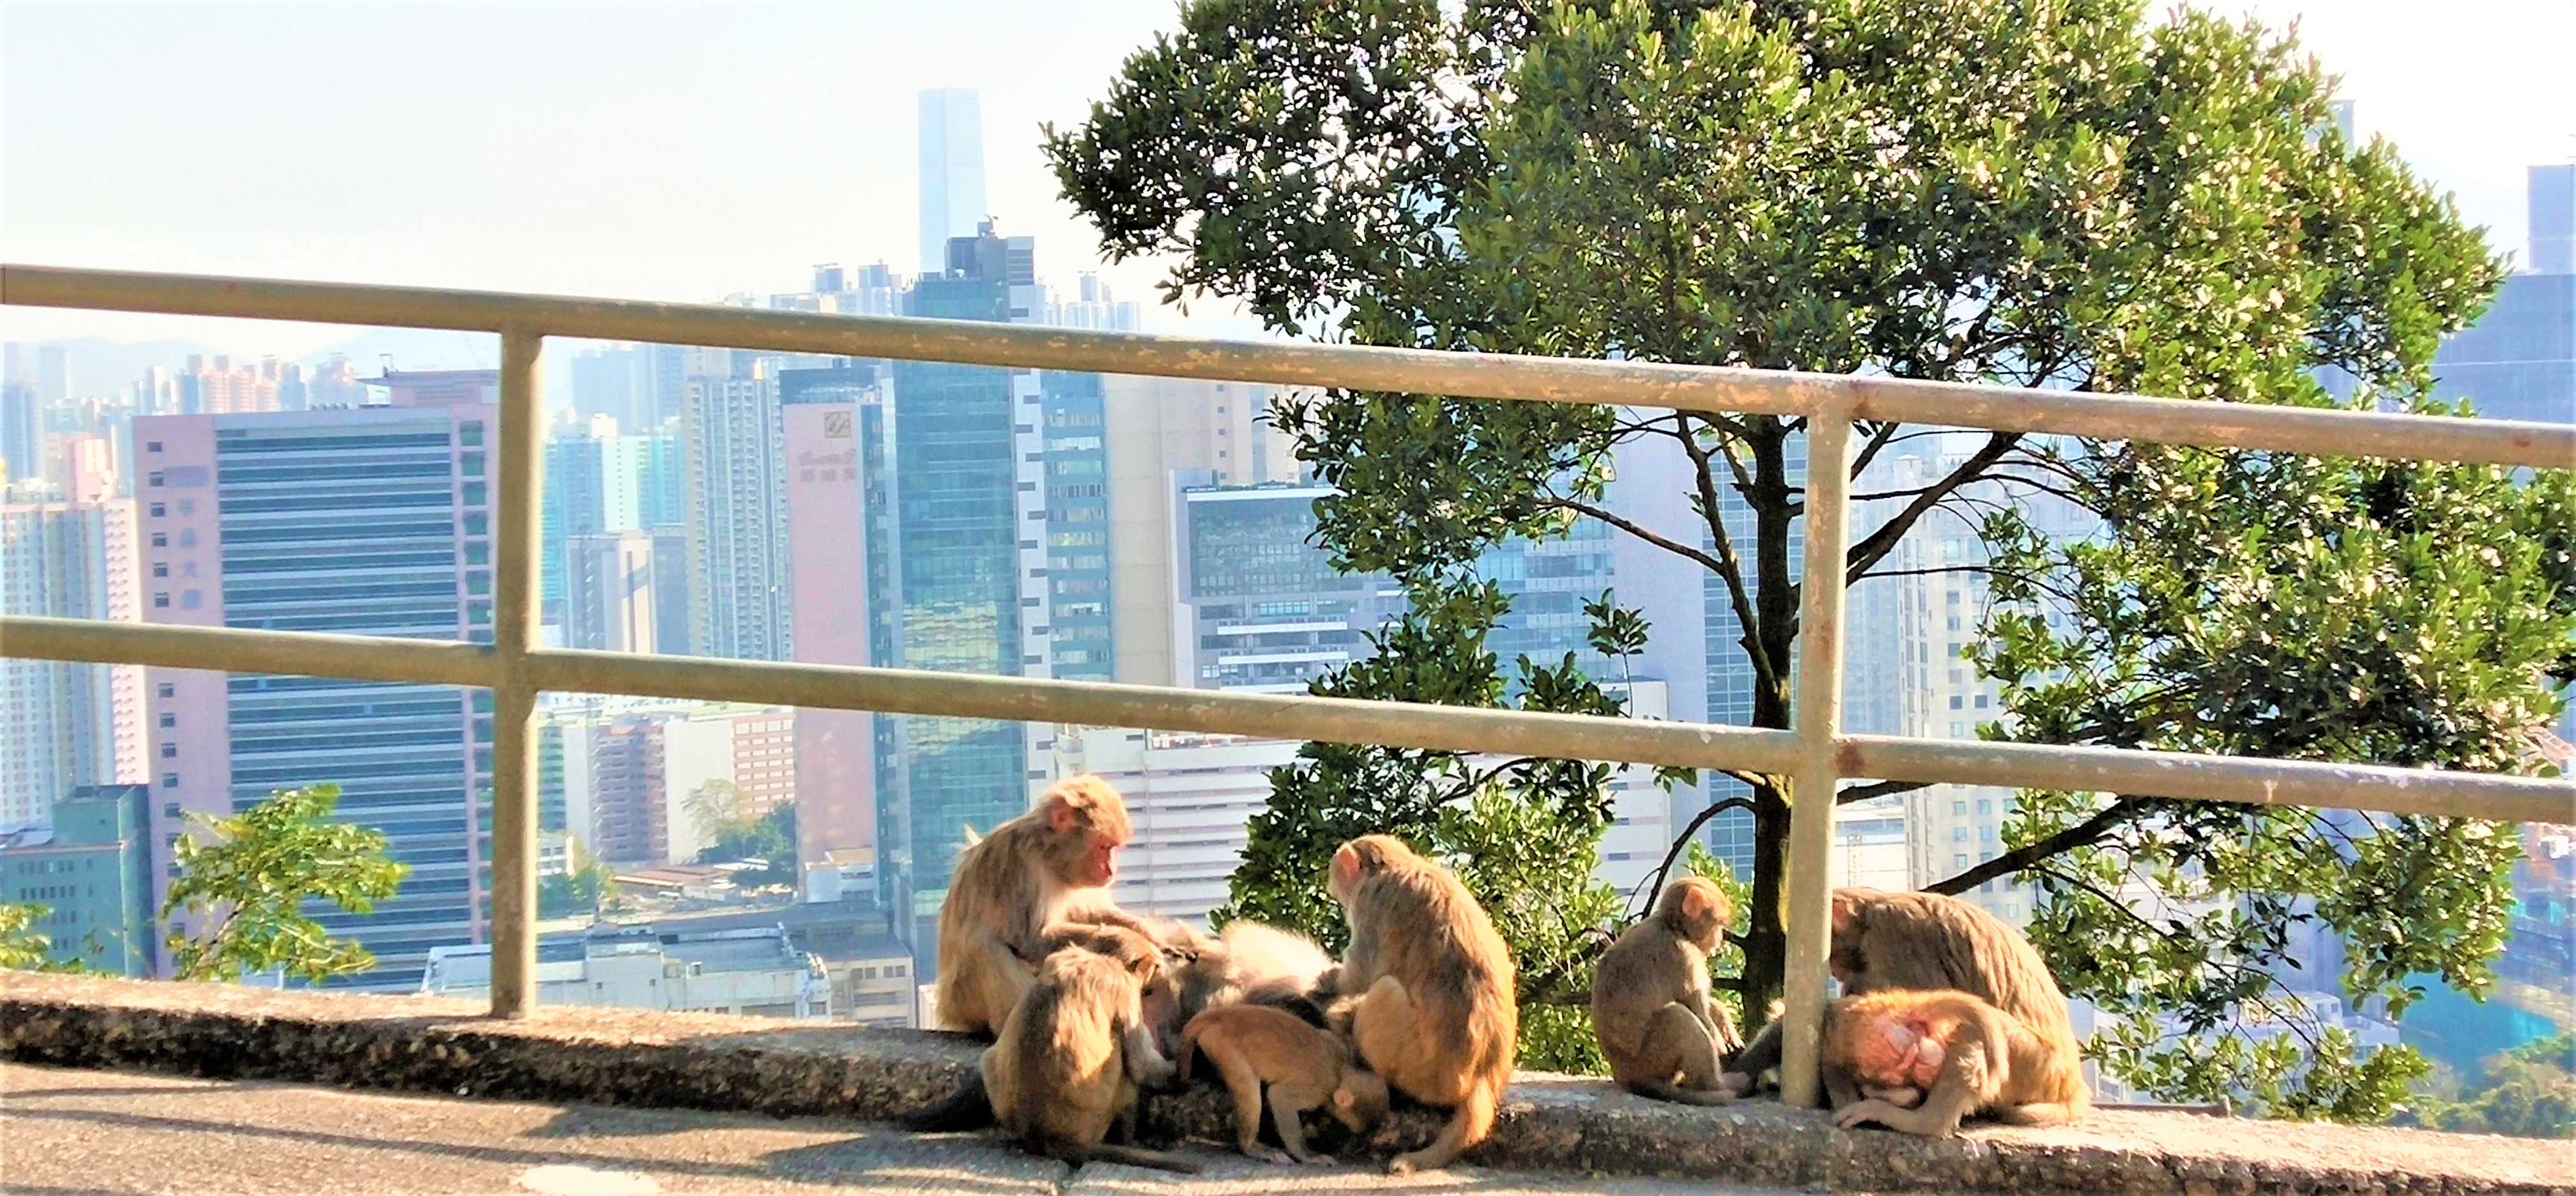 Monkeys are busy and ignore the good view!